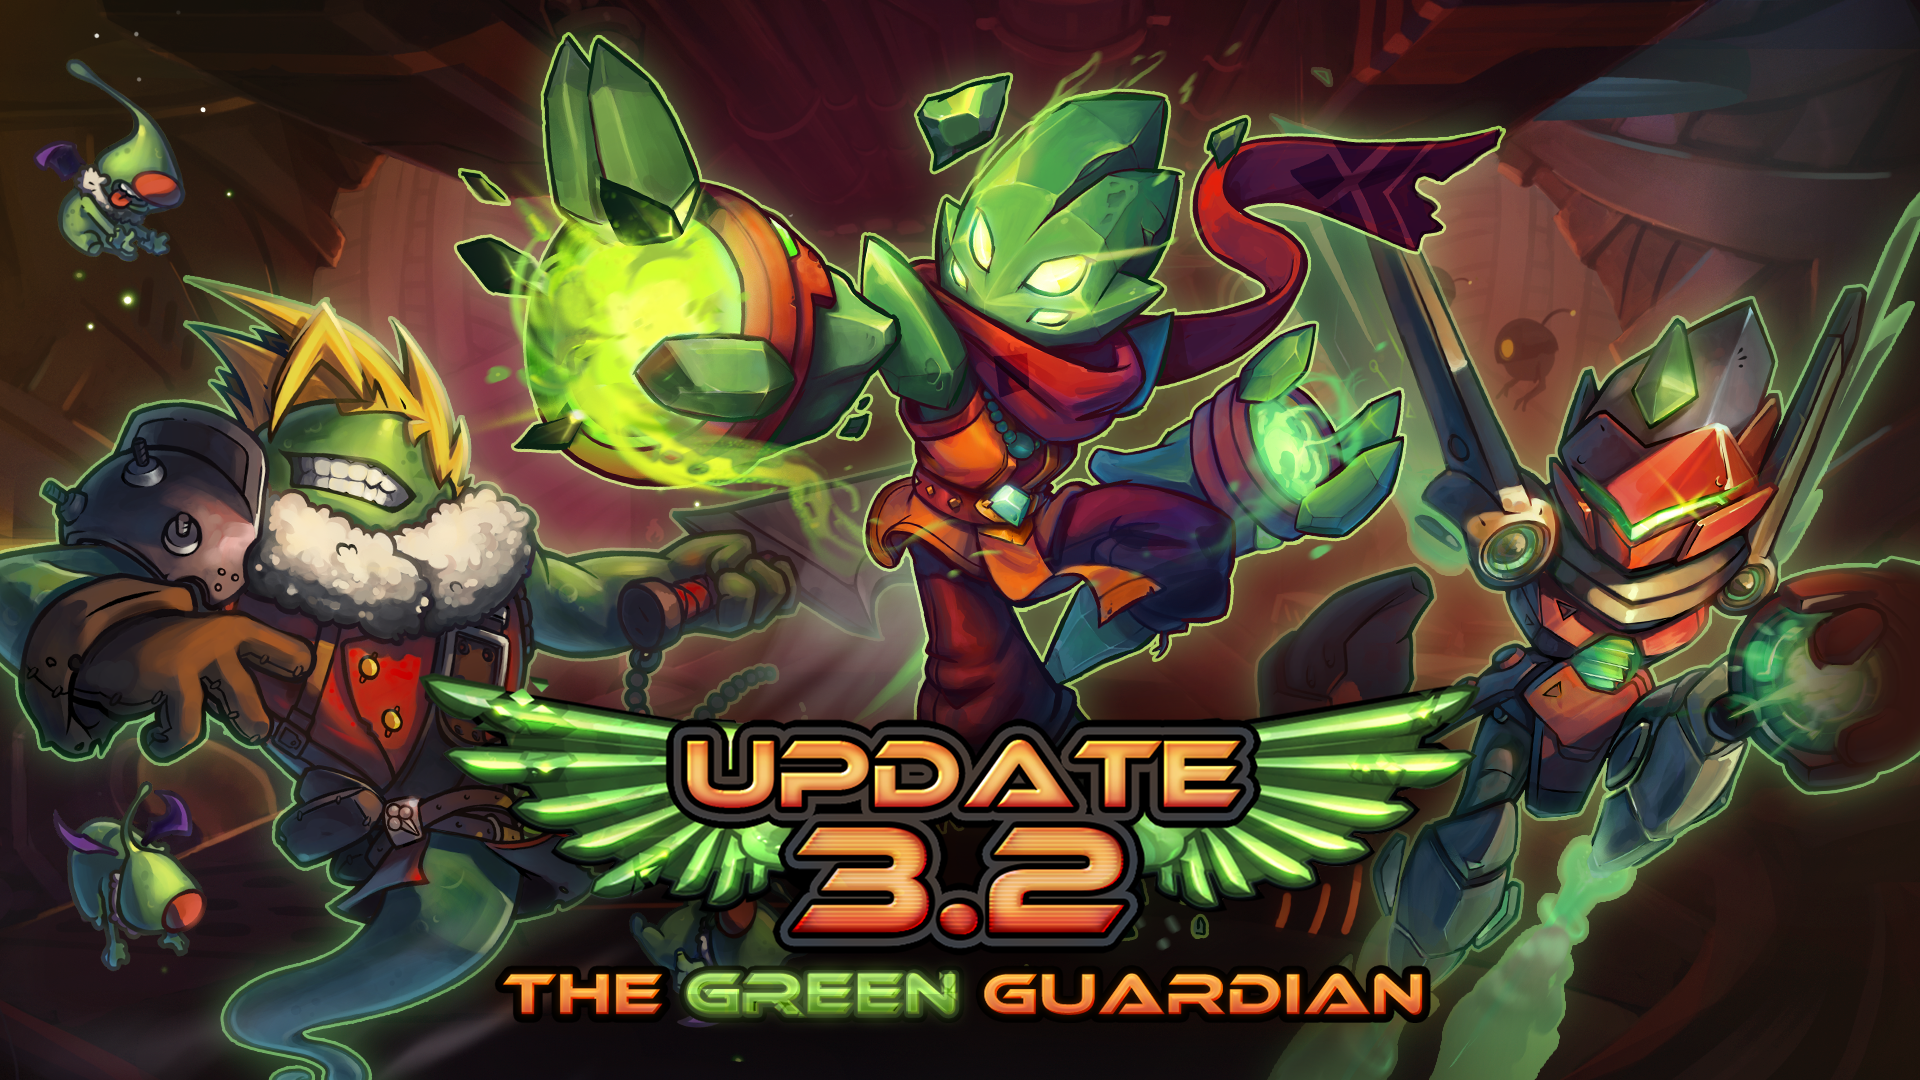 Awesomenauts 3.2: The Green Guardian has just launched on Steam! 